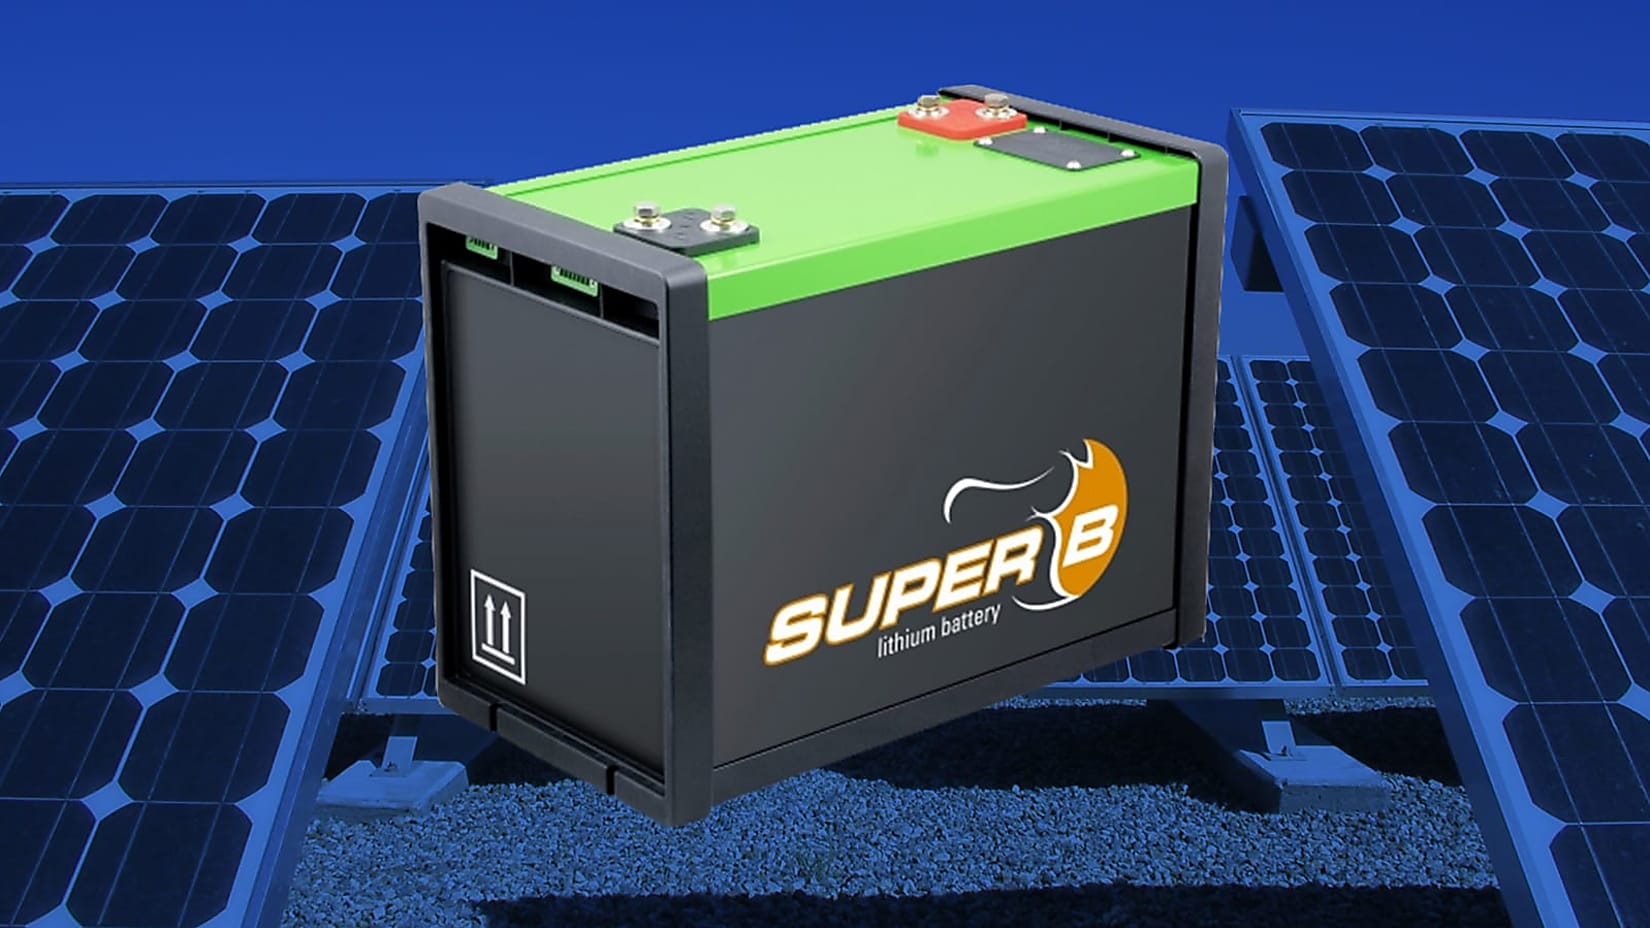 Power up! – Get more power out of state-of-the art lithium ion batteries